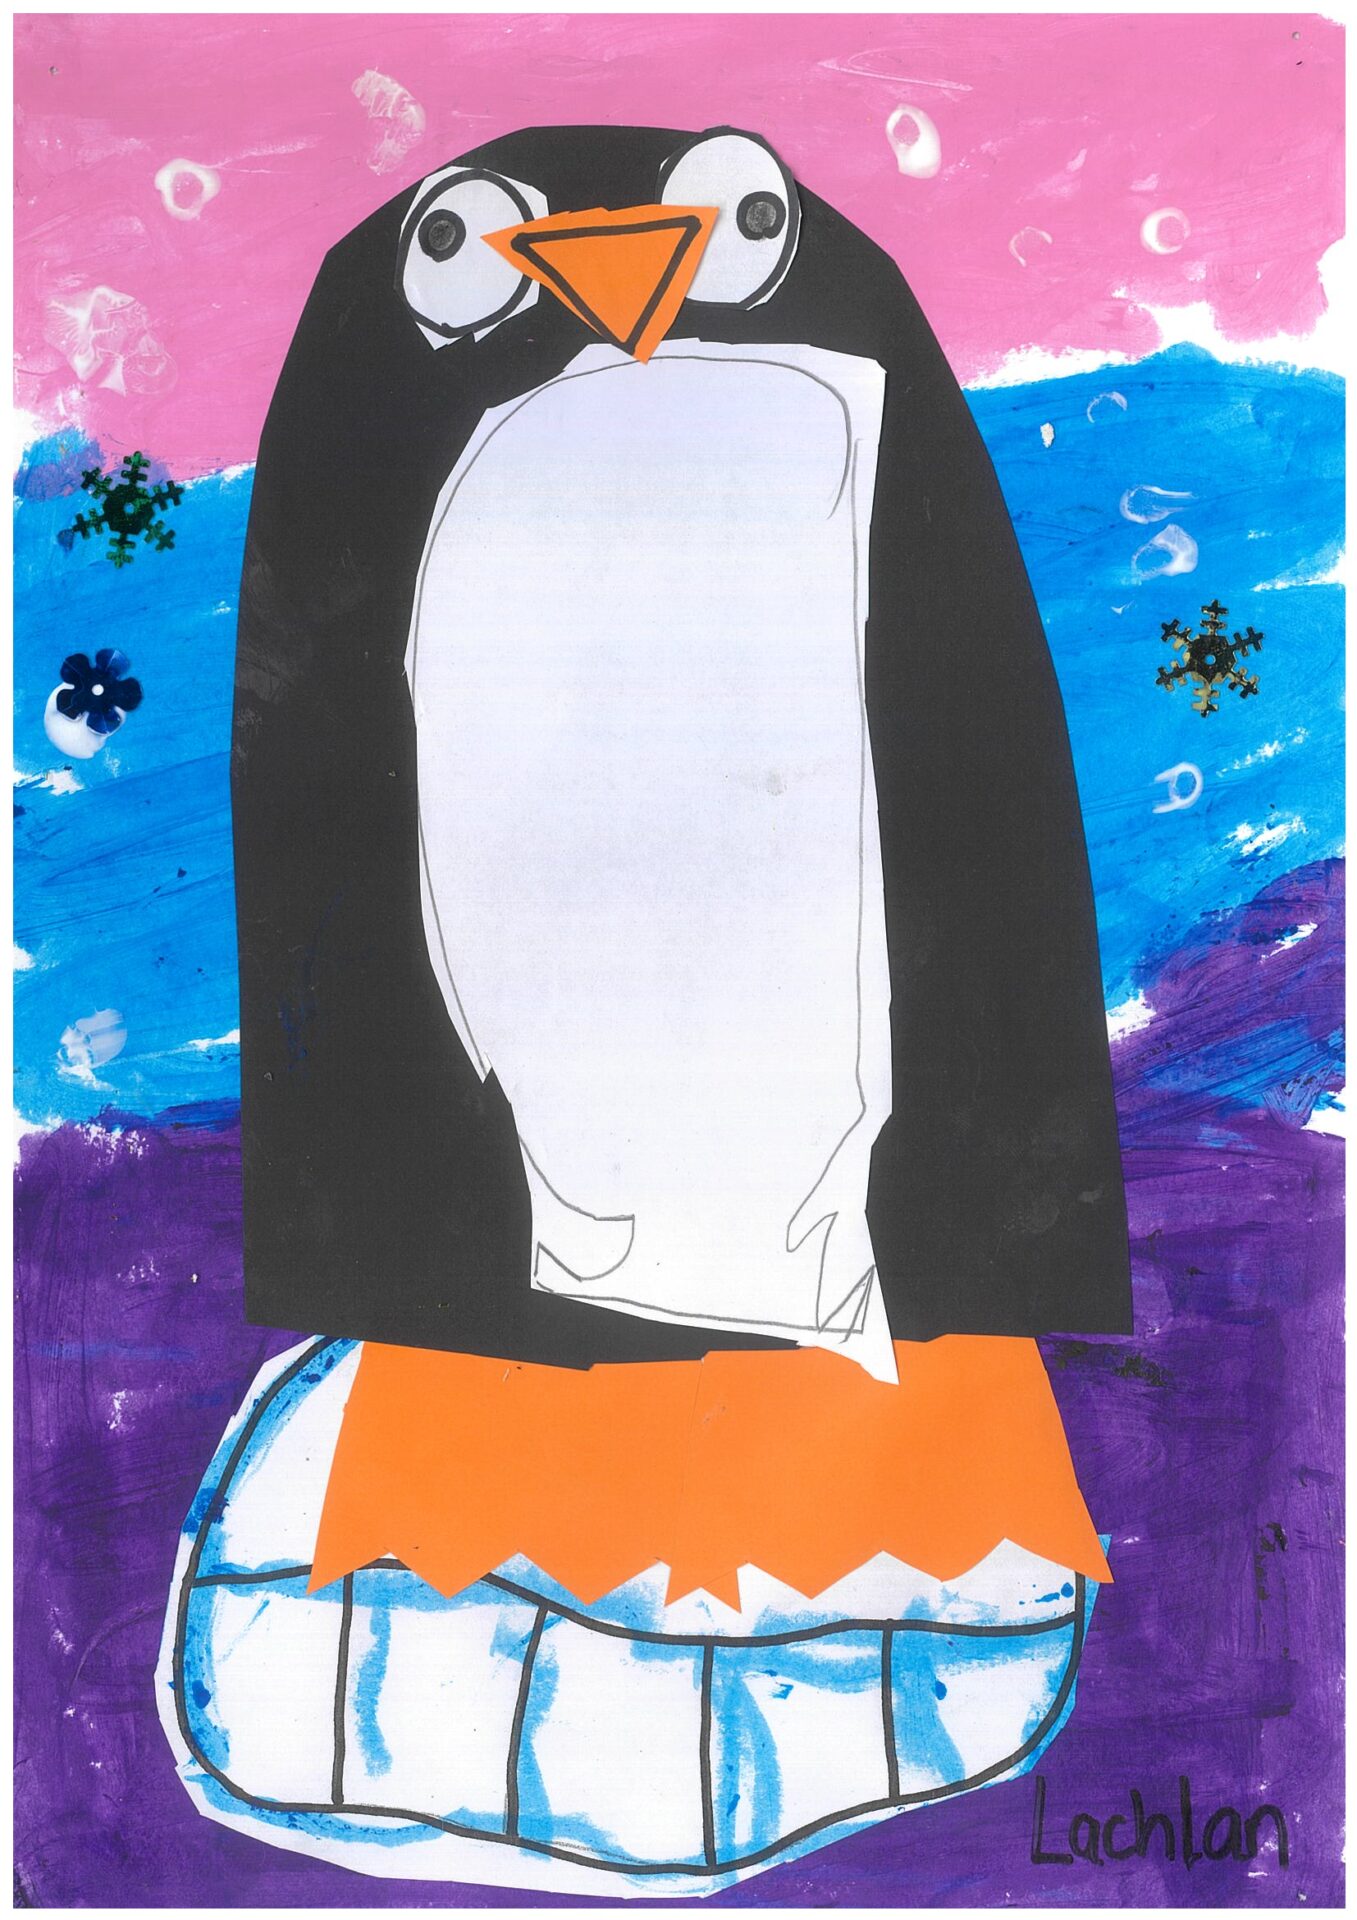 5. Lachlan Binks, 'Penguin in Snow', paint and collage, Kinder, Tamworth Public School